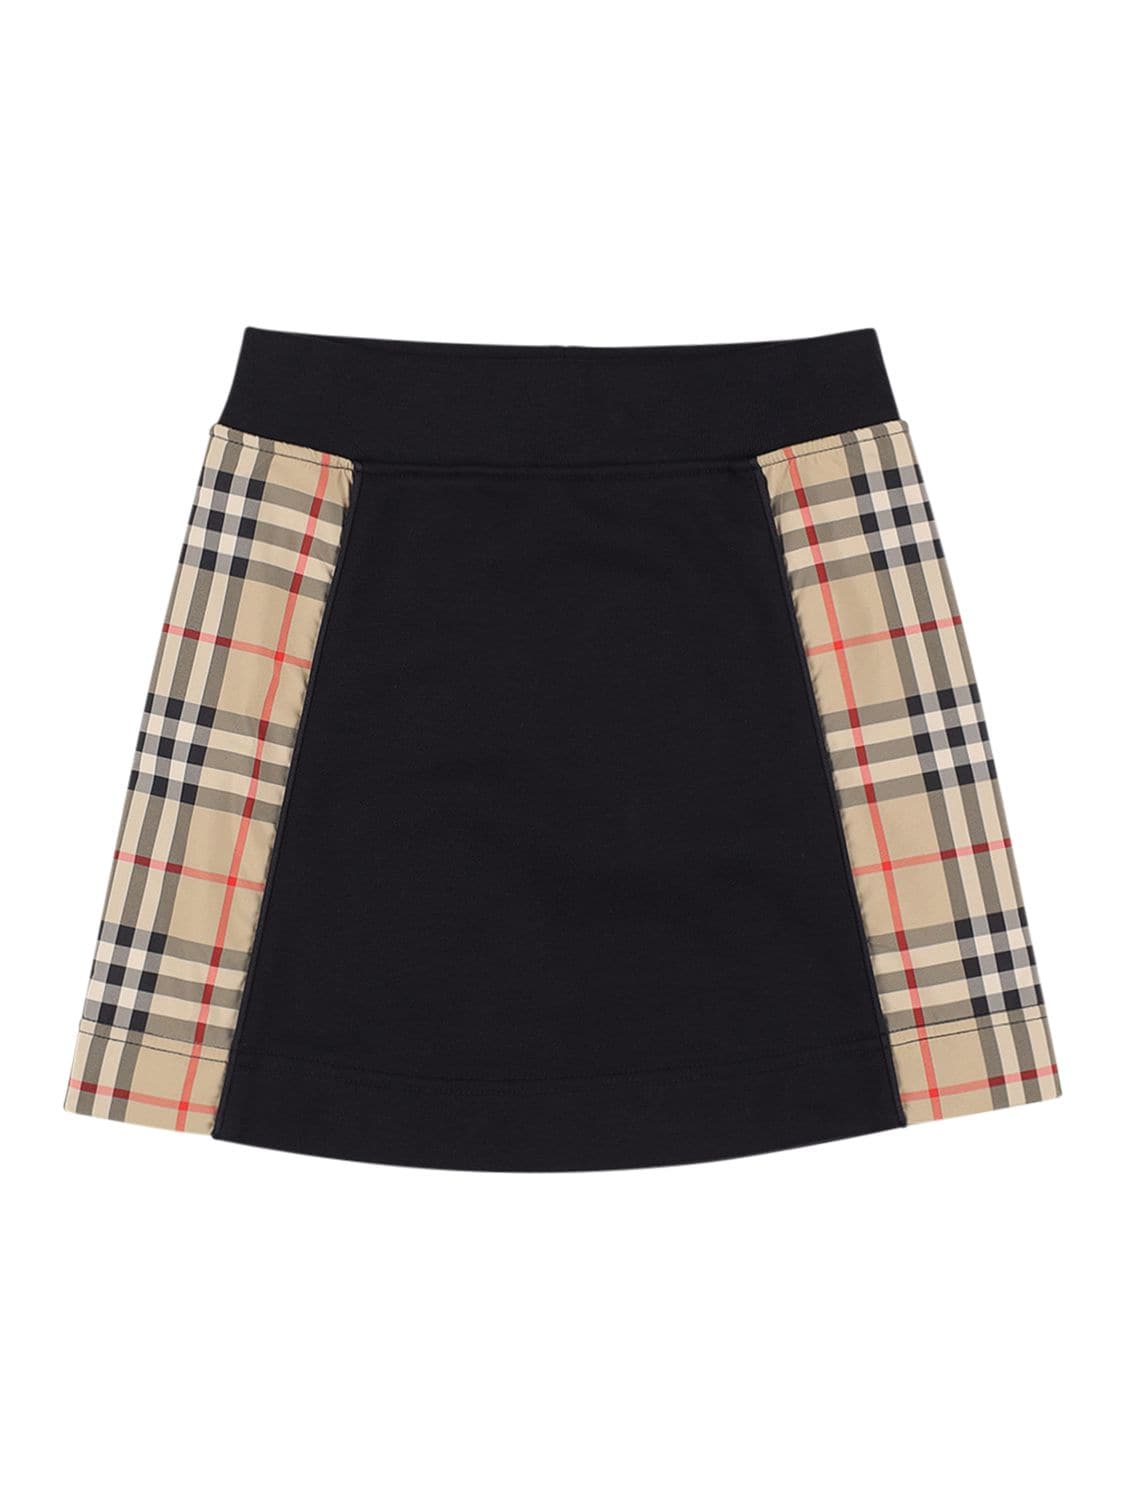 Image of Cotton Skirt W/ Check Bands